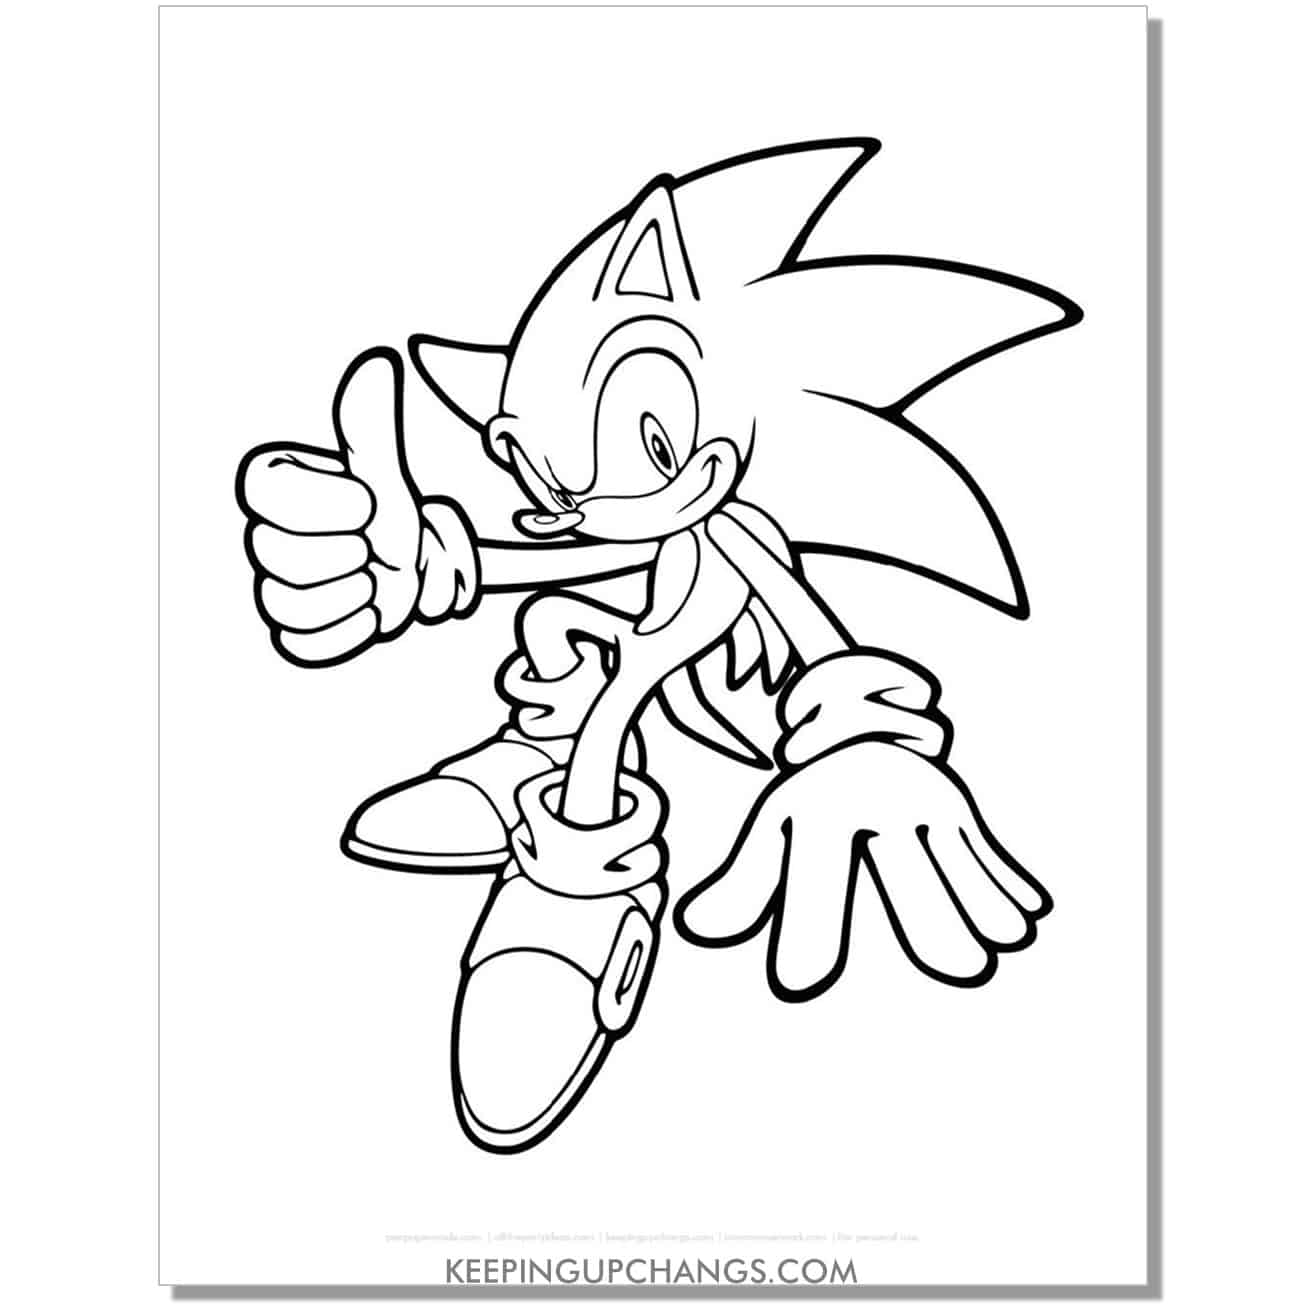 sonic leaning back with thumbs up coloring page.